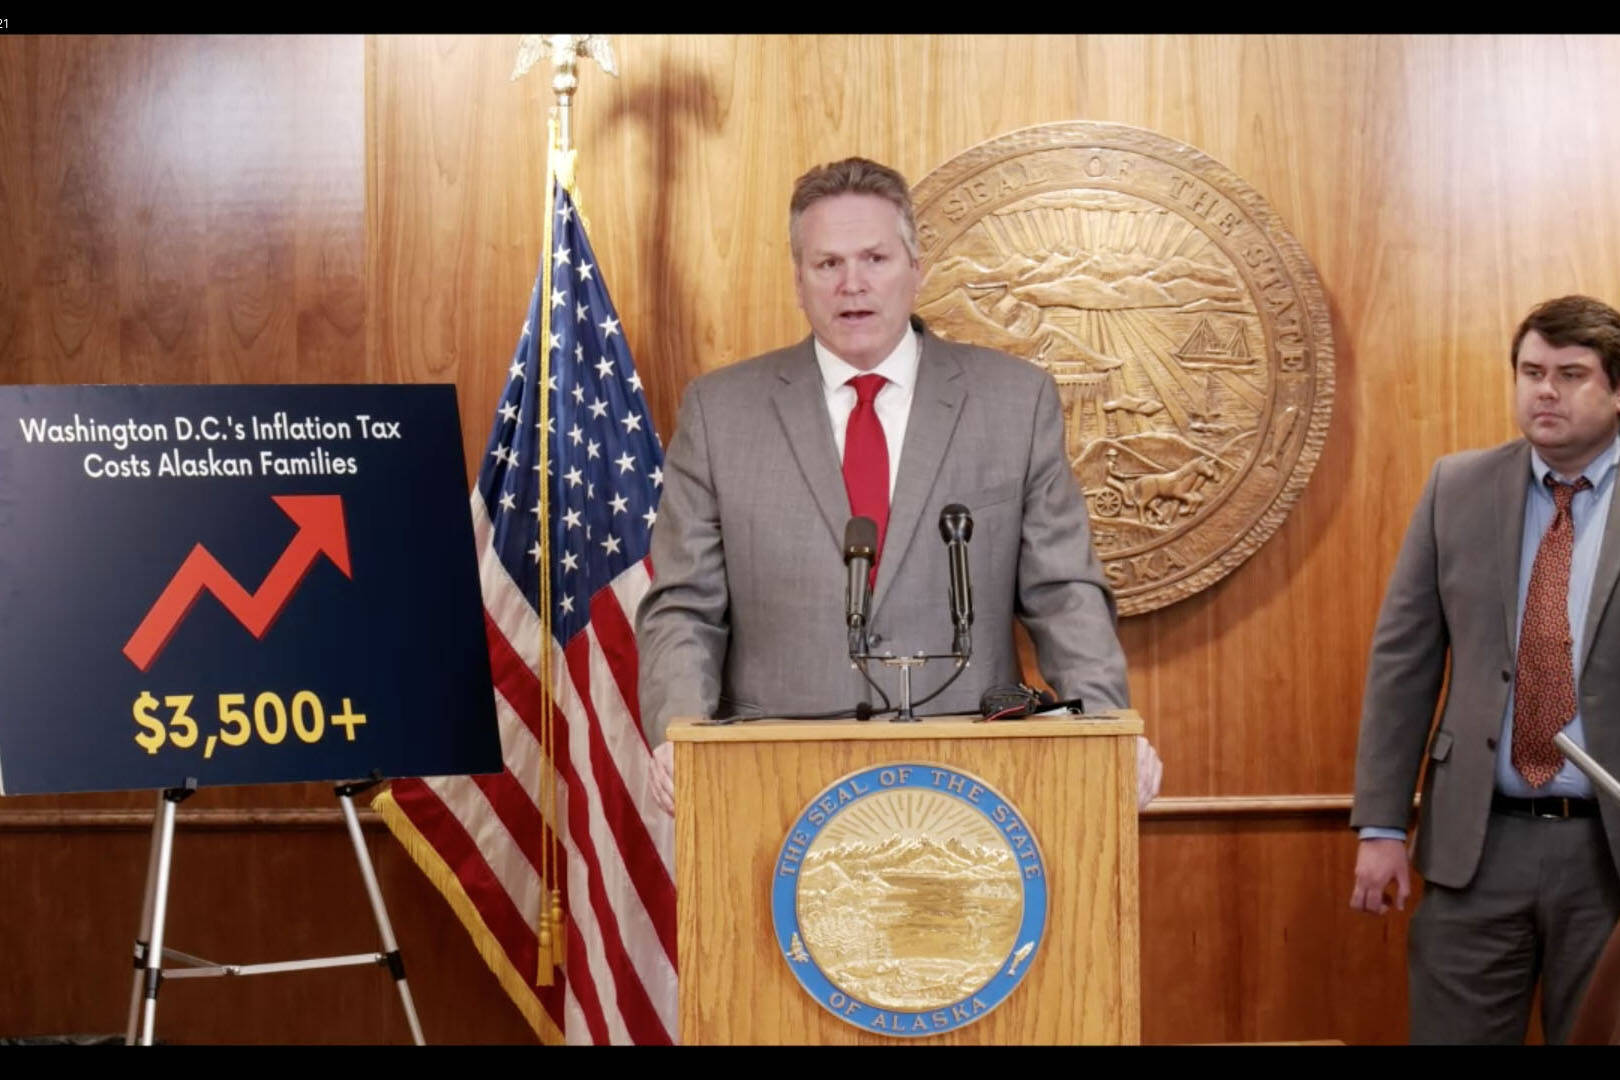 Gov. Mike Dunleavy speaks about state revenue during a press conference on Tuesday, March 15, 2022 in Juneau, Alaska. (Screenshot)